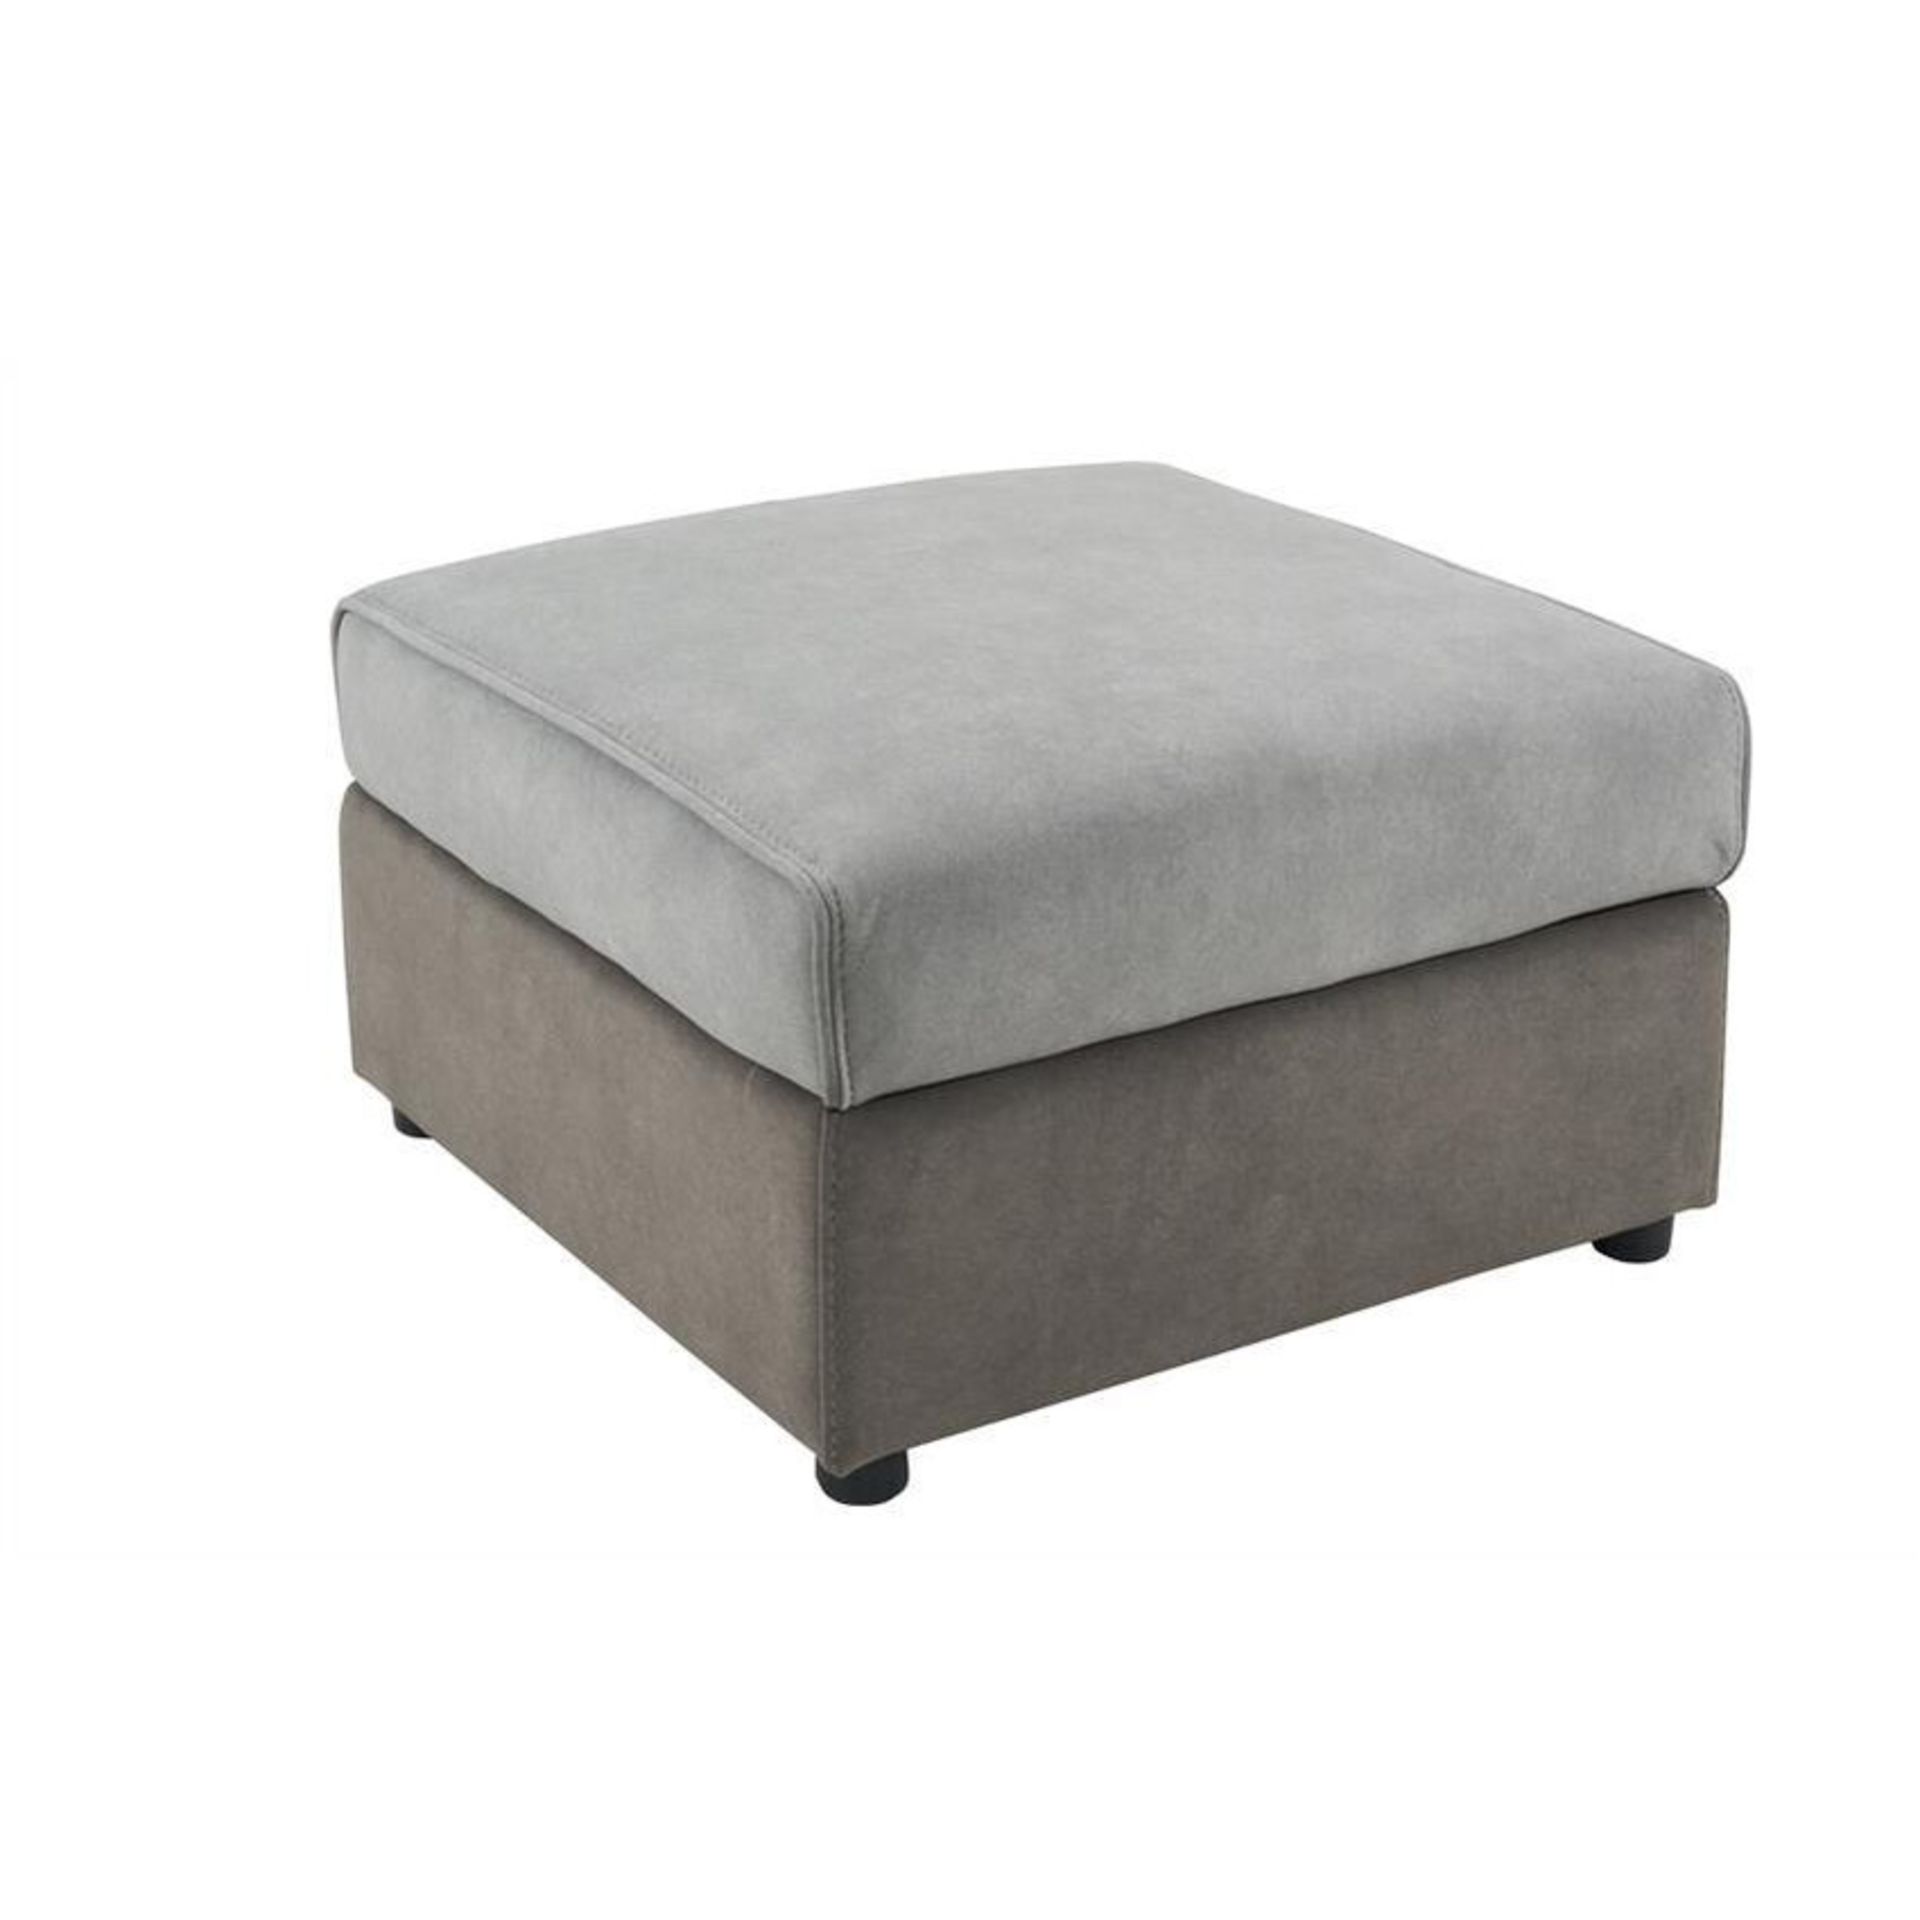 Fortuna Storage Footstool in Verona Taupe Mushroom with Contrast Stitch and Glides RRP 480About